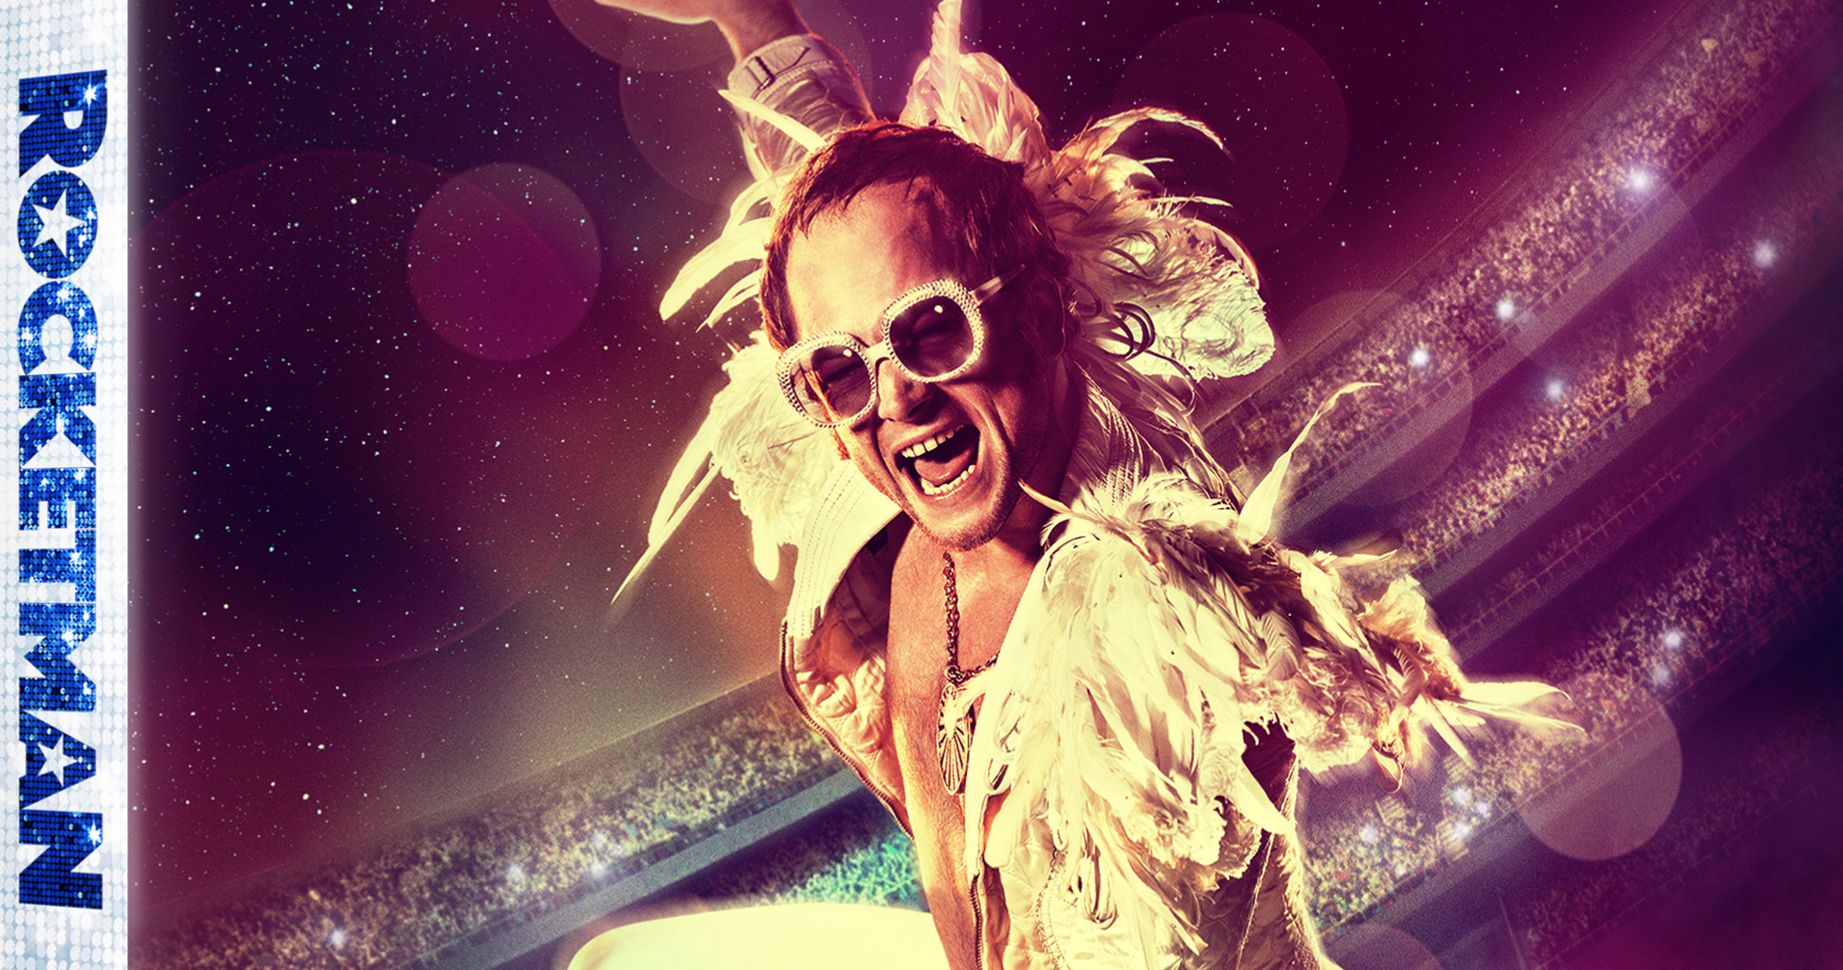 Rocketman Lands on Digital, Blu-ray in August with Over 75 Minutes of Bonus Content